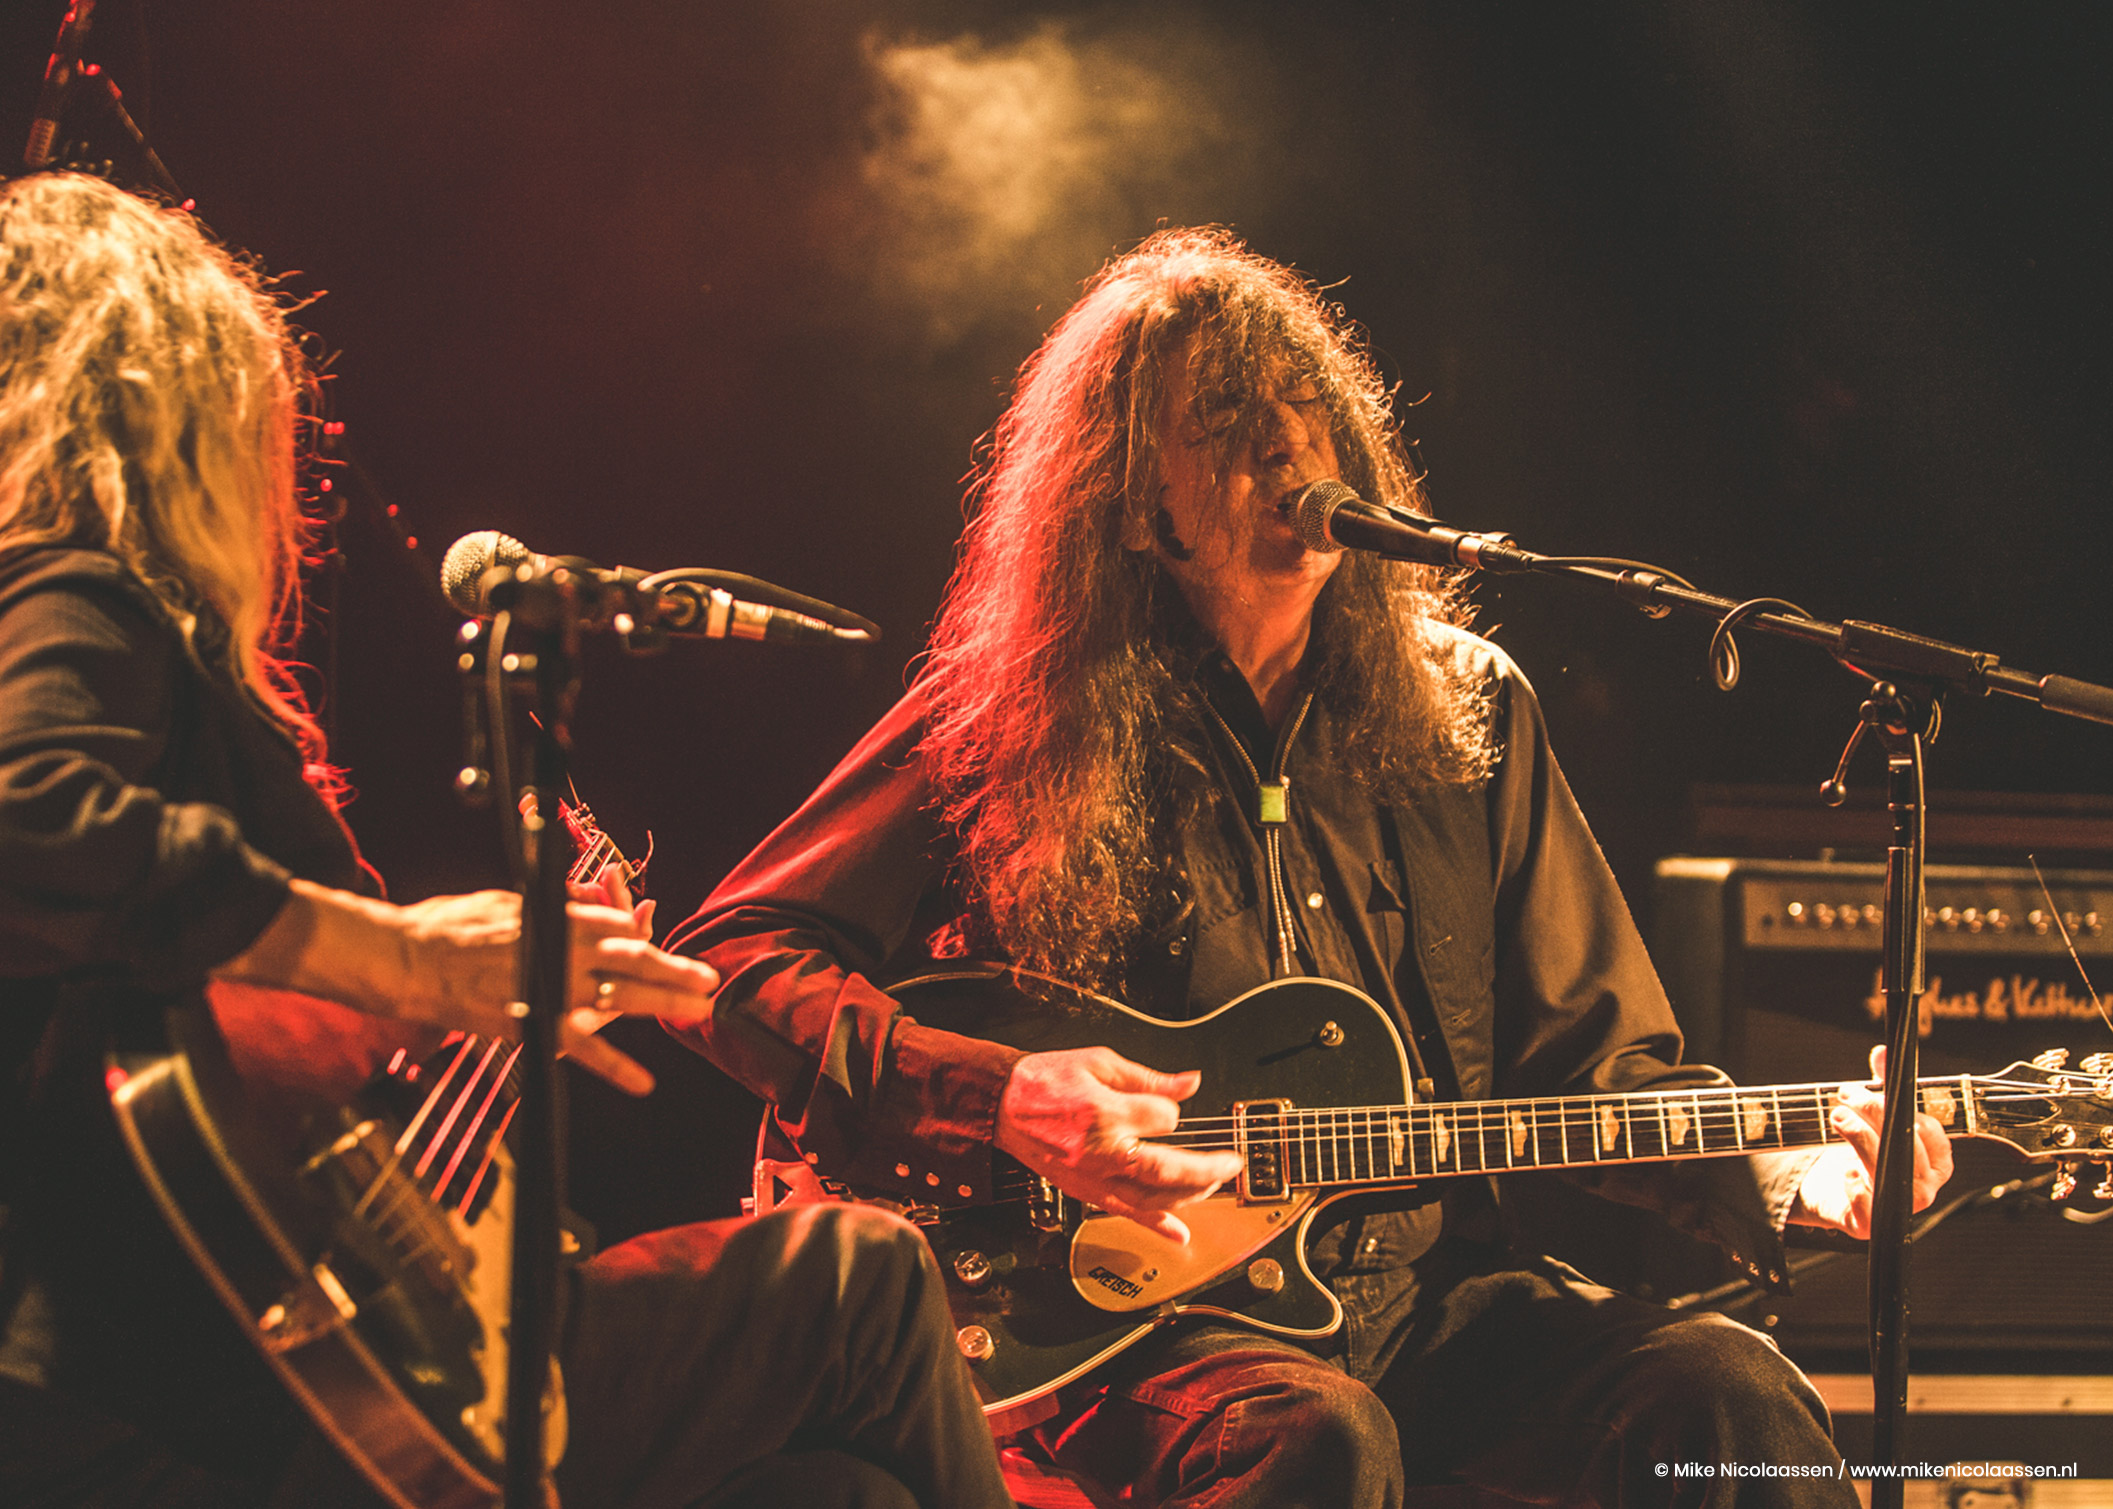 Fred & Toody Cole, Dead Moon - Nijmegen, The Netherlands - © Photography: Mike Nicolaassen